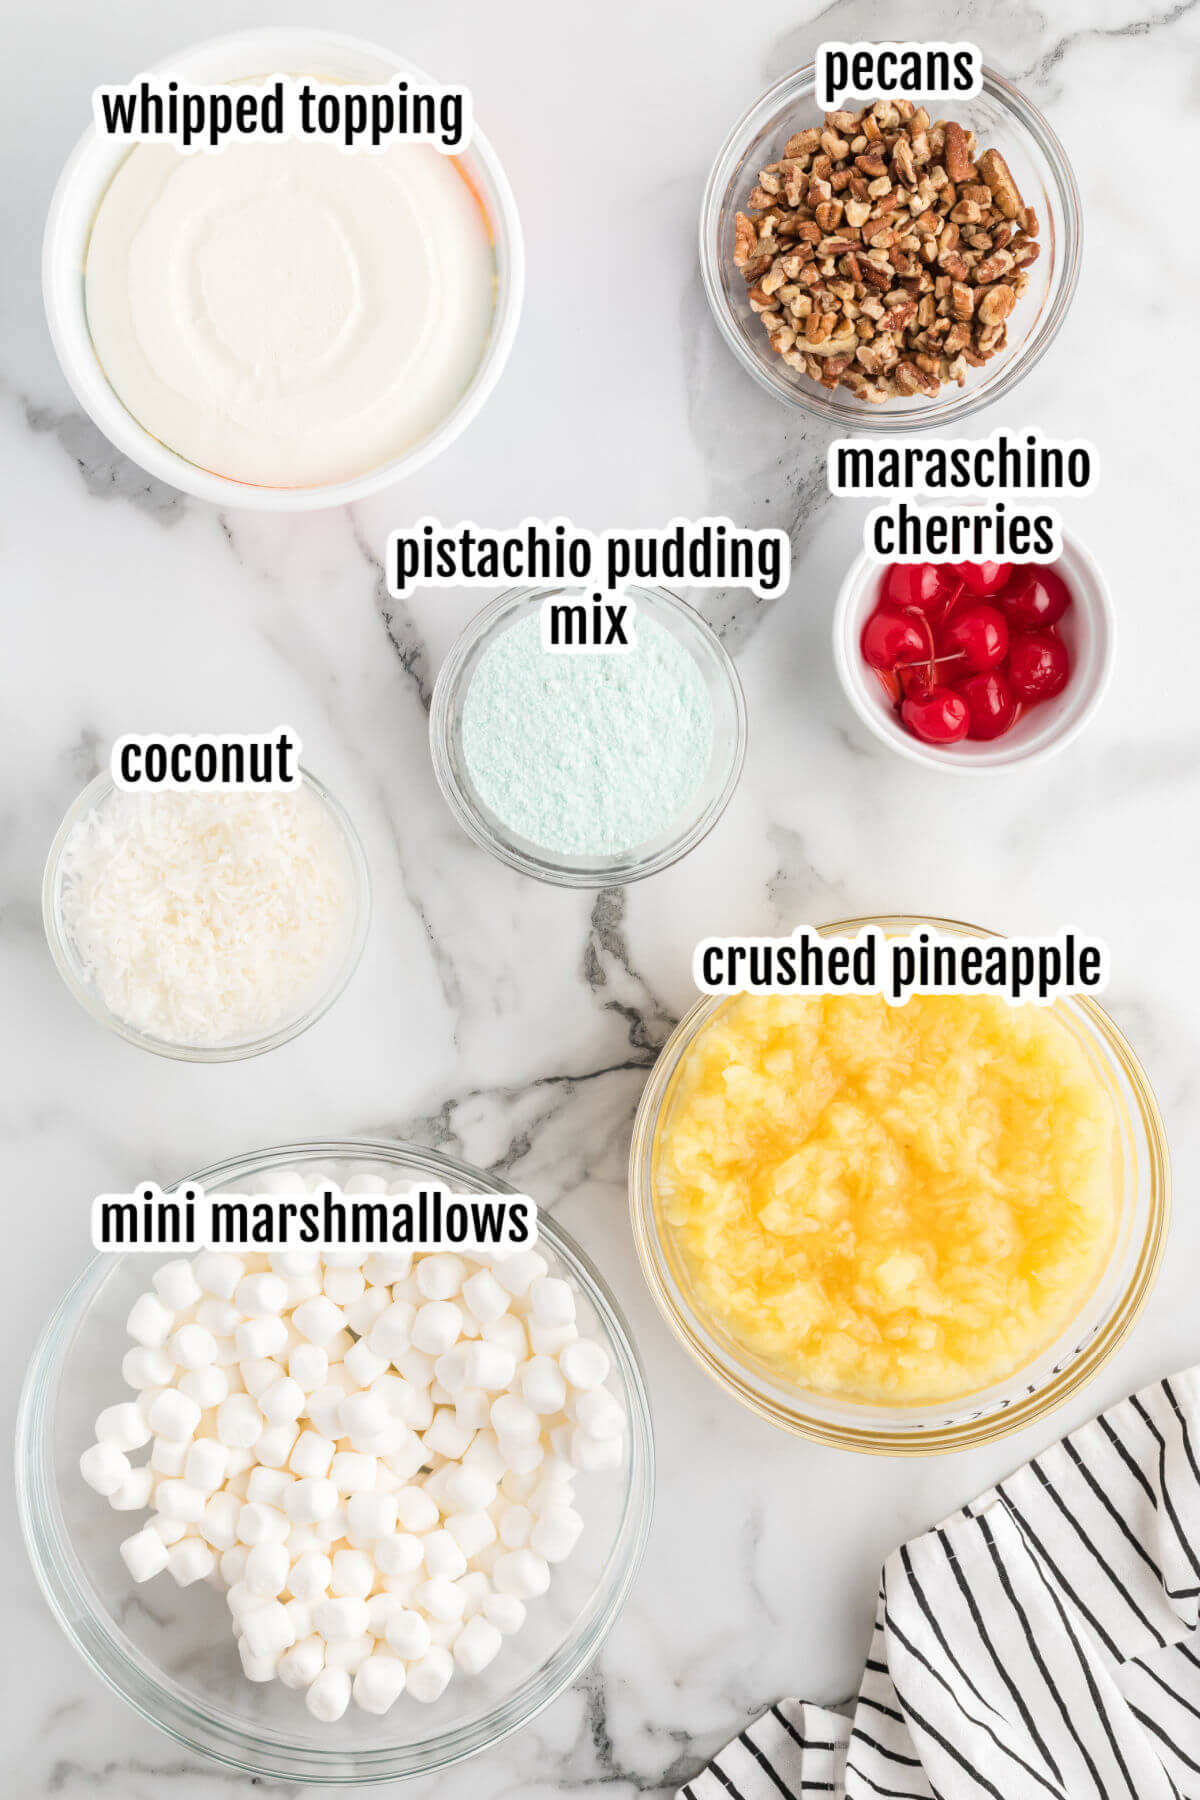 Image of the ingredients needed to make the Watergate salad. 